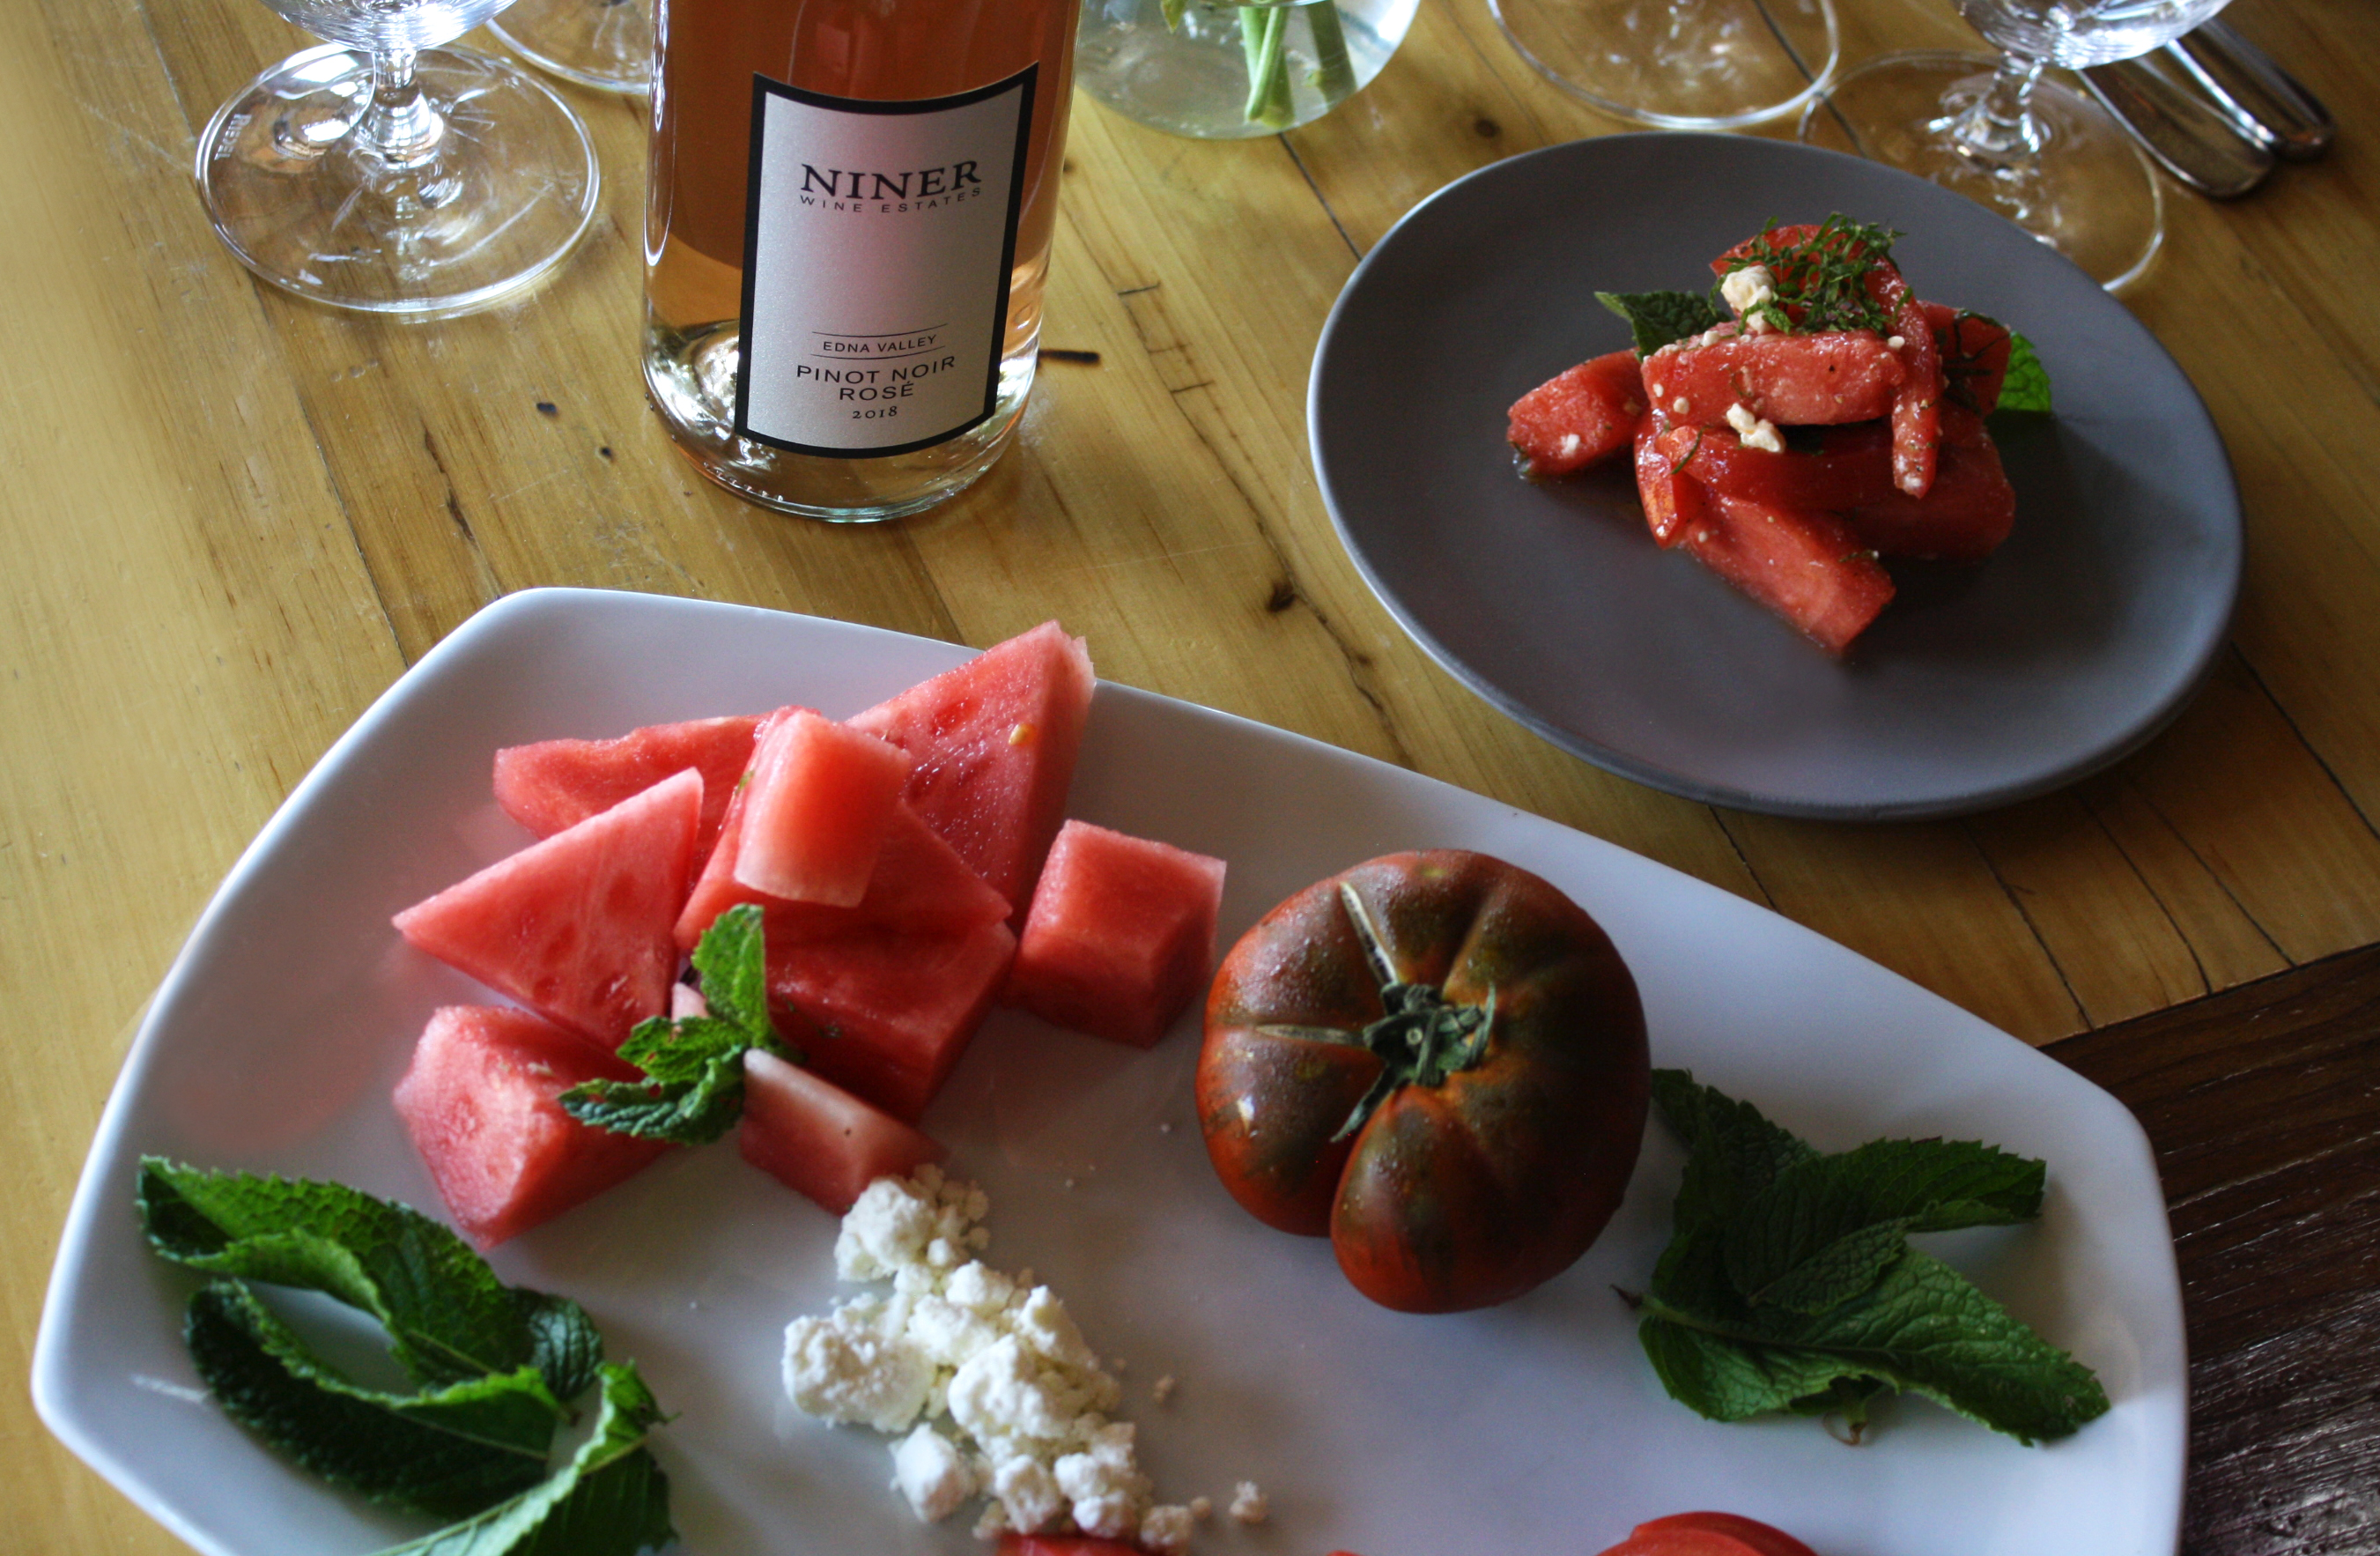 Ingredients for watermelon salad on a white plate with a glass and bottle of Rose